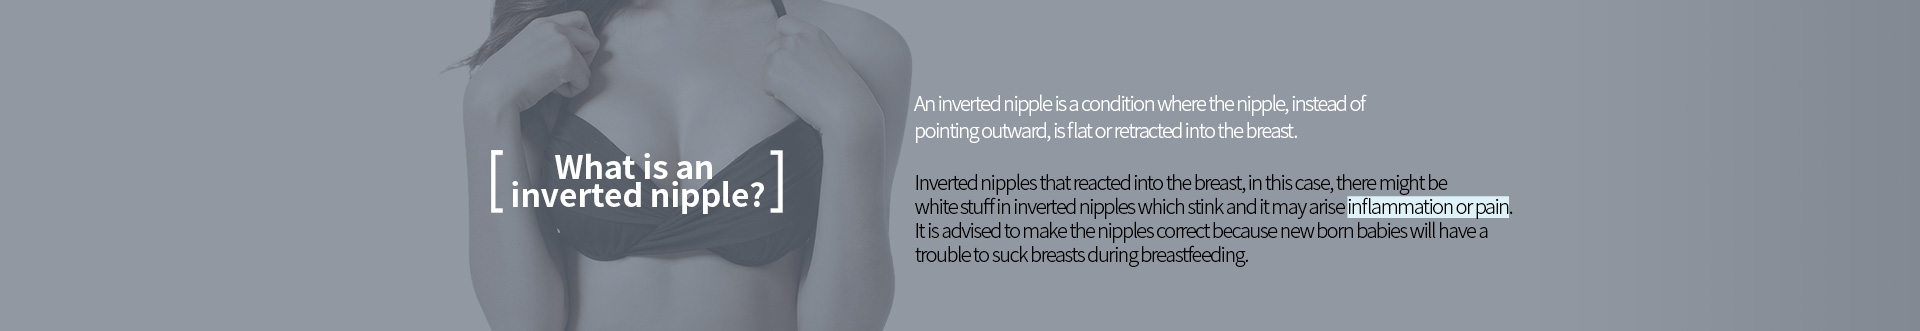 An inverted nipple is a condition where the nipple, instead of pointing outward, is flat or retracted into the breast.